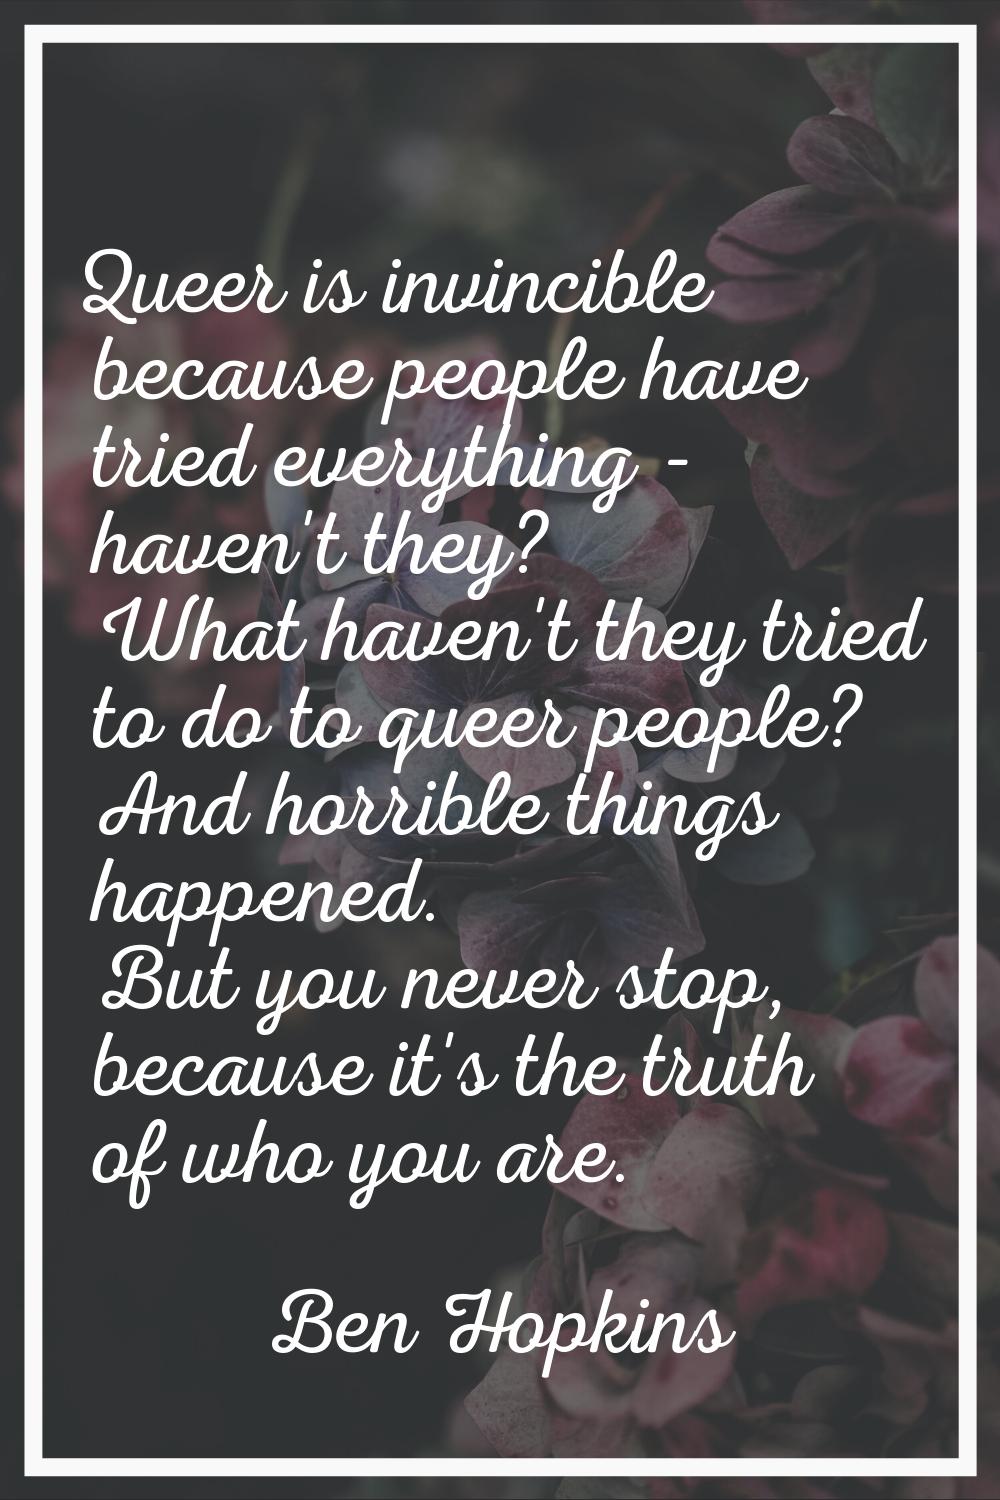 Queer is invincible because people have tried everything - haven't they? What haven't they tried to